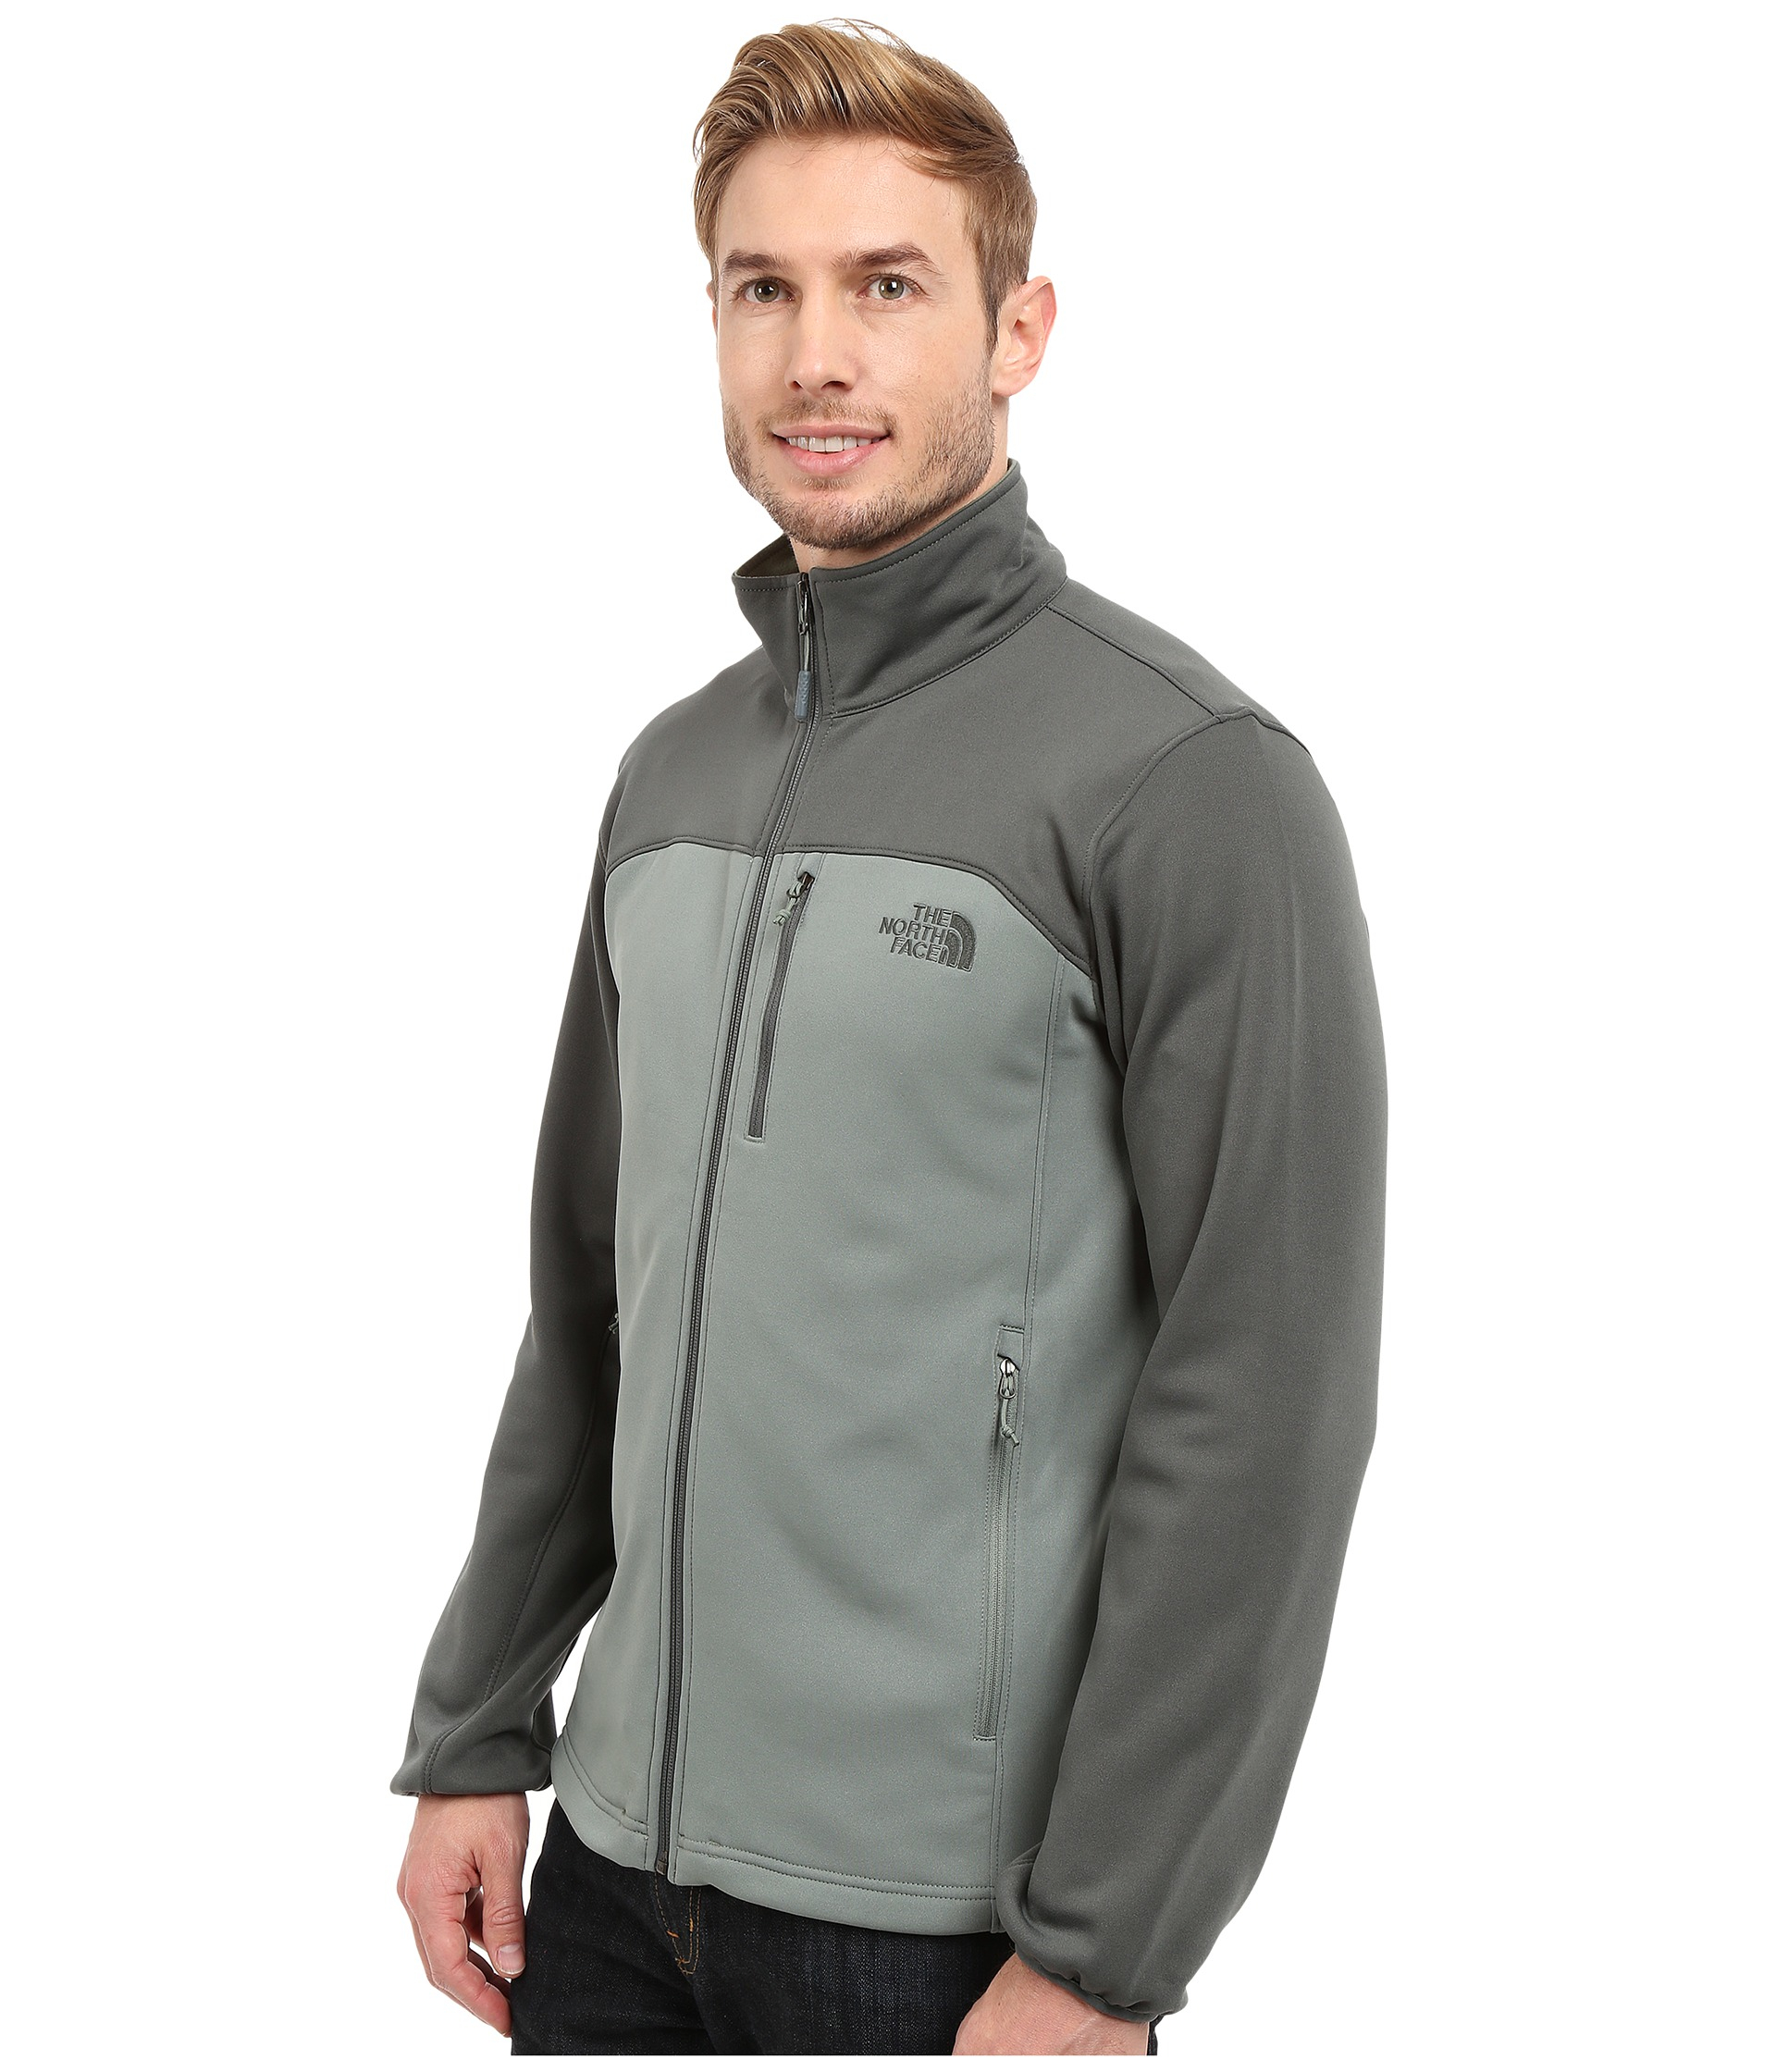 Lyst - The North Face Momentum Jacket in Green for Men